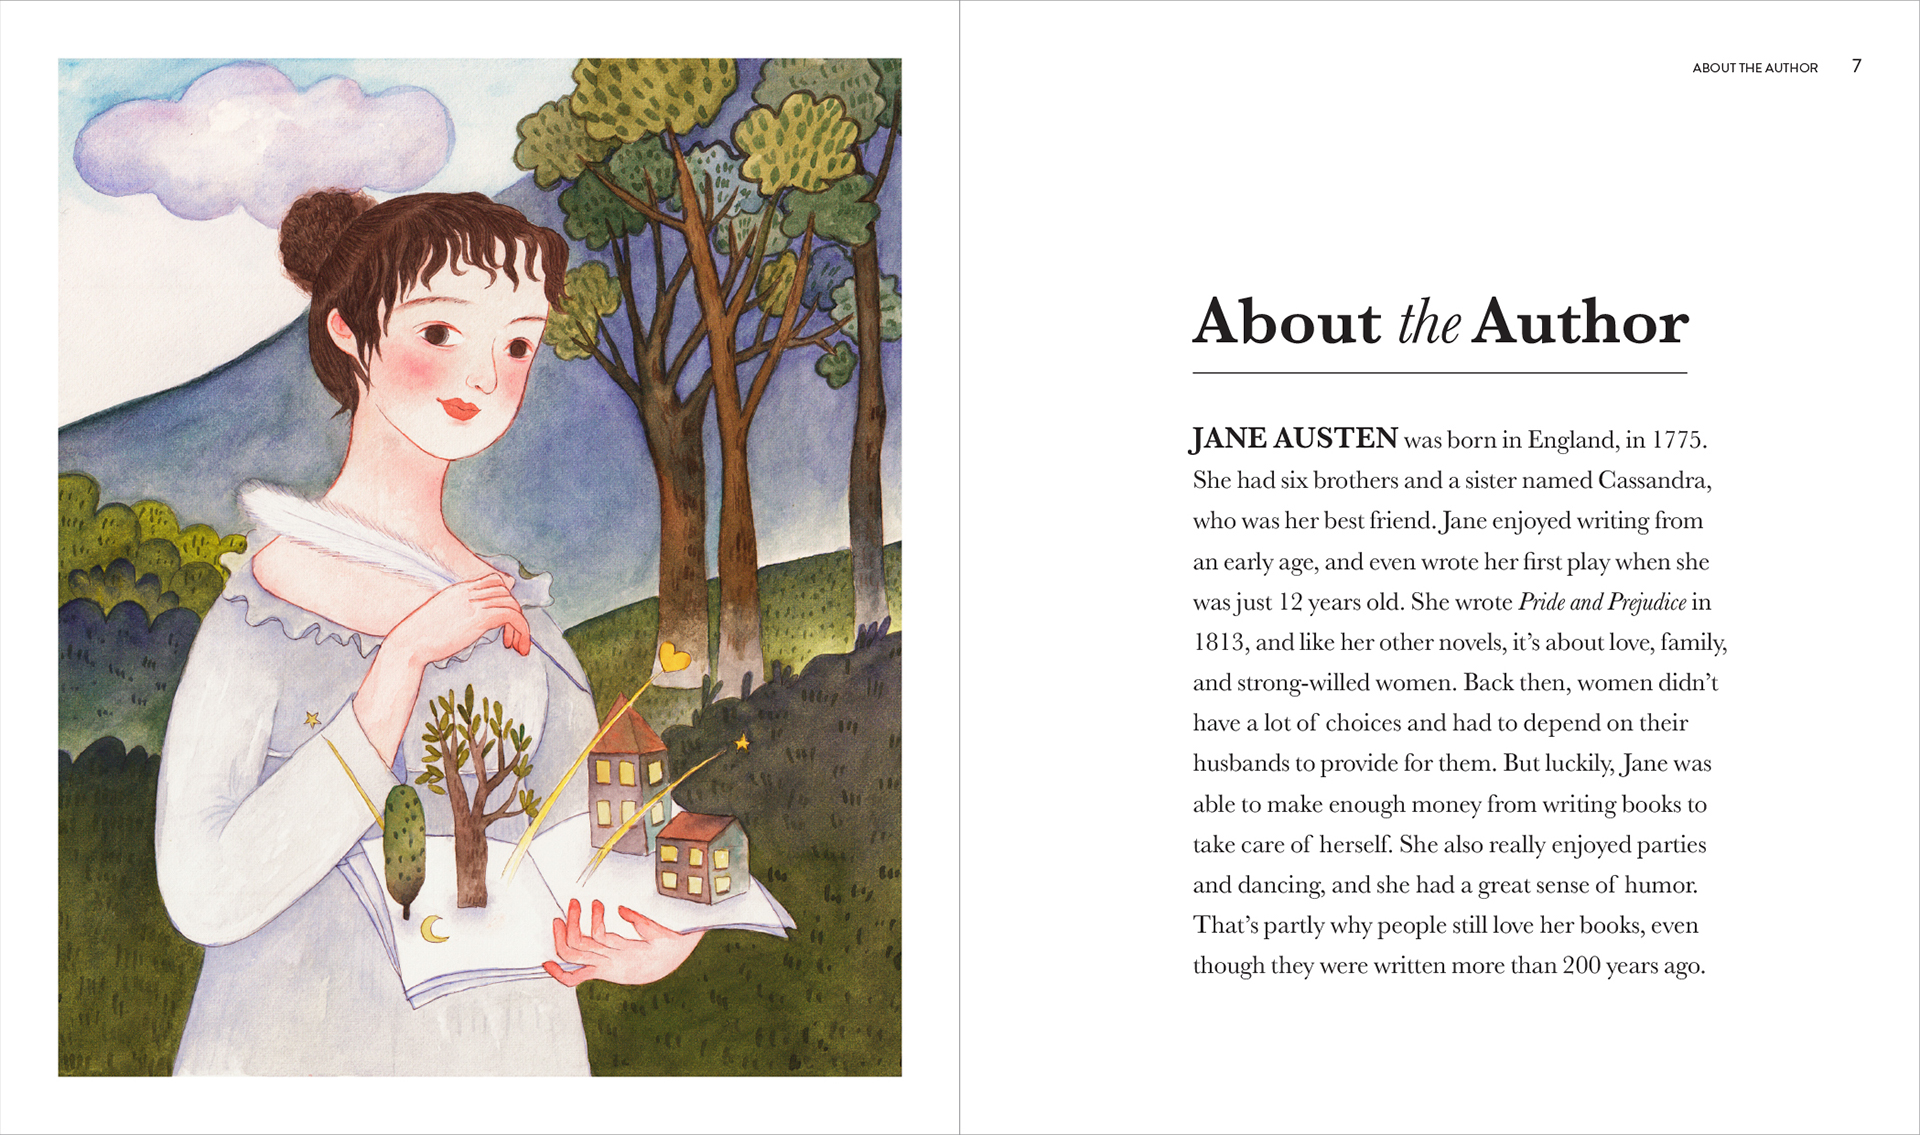 KinderGuides Early Learning Guide to Jane Austen's Pride and Prejudice. 